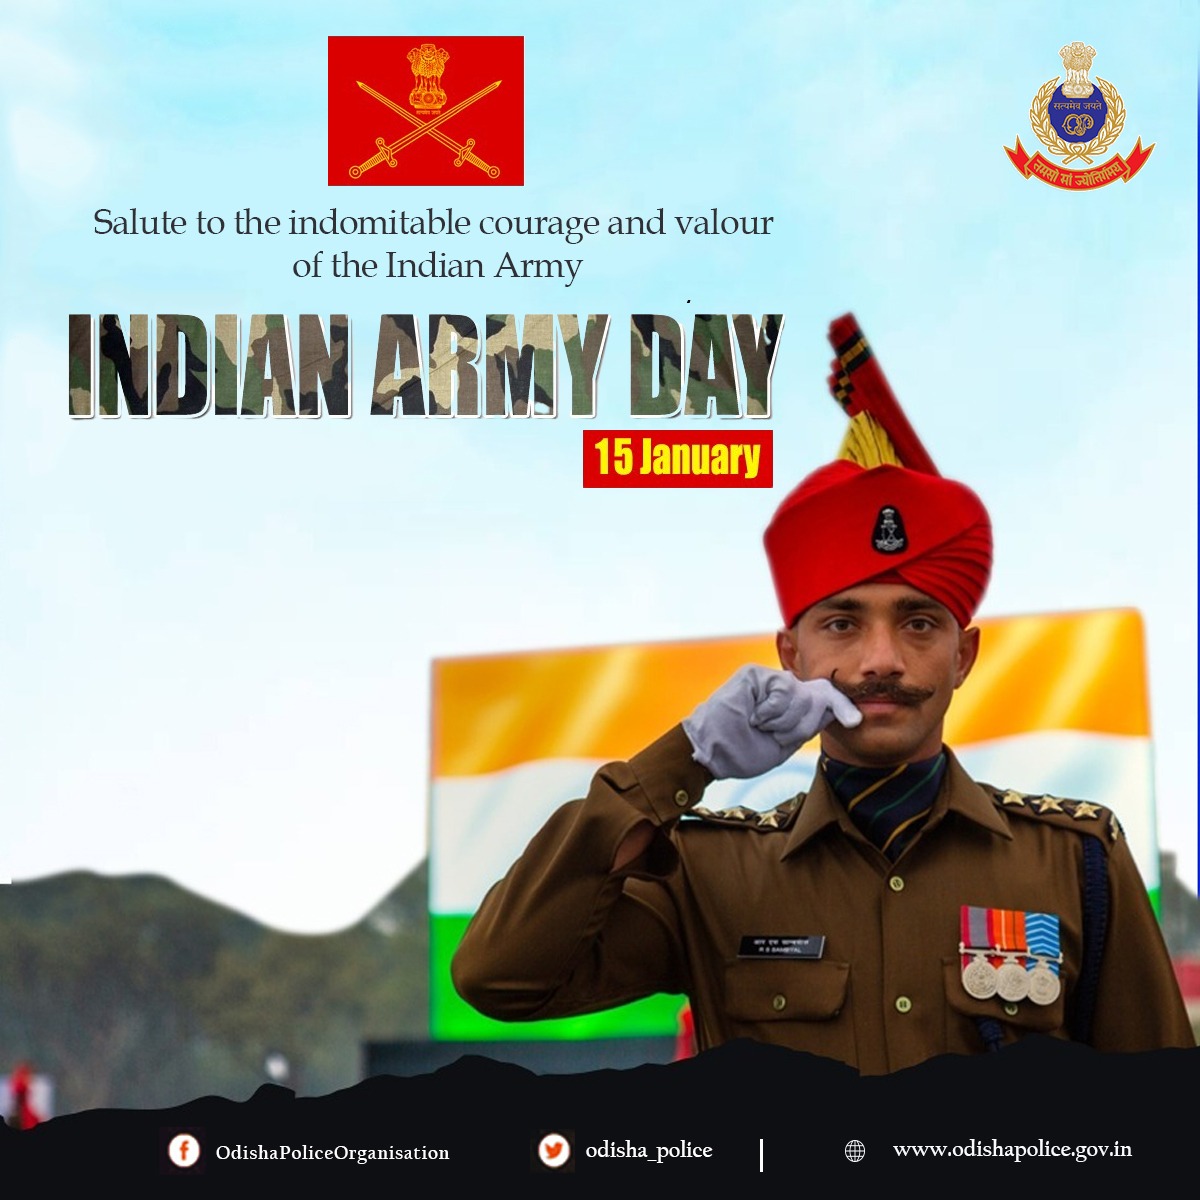 Warm wishes to all personnel and families of #IndianArmy on the occasion of Indian Army Raising Day. On this special day, we express our honour to the warriors who render their daring & dedicated service to the nation. #ArmyDay @adgpi